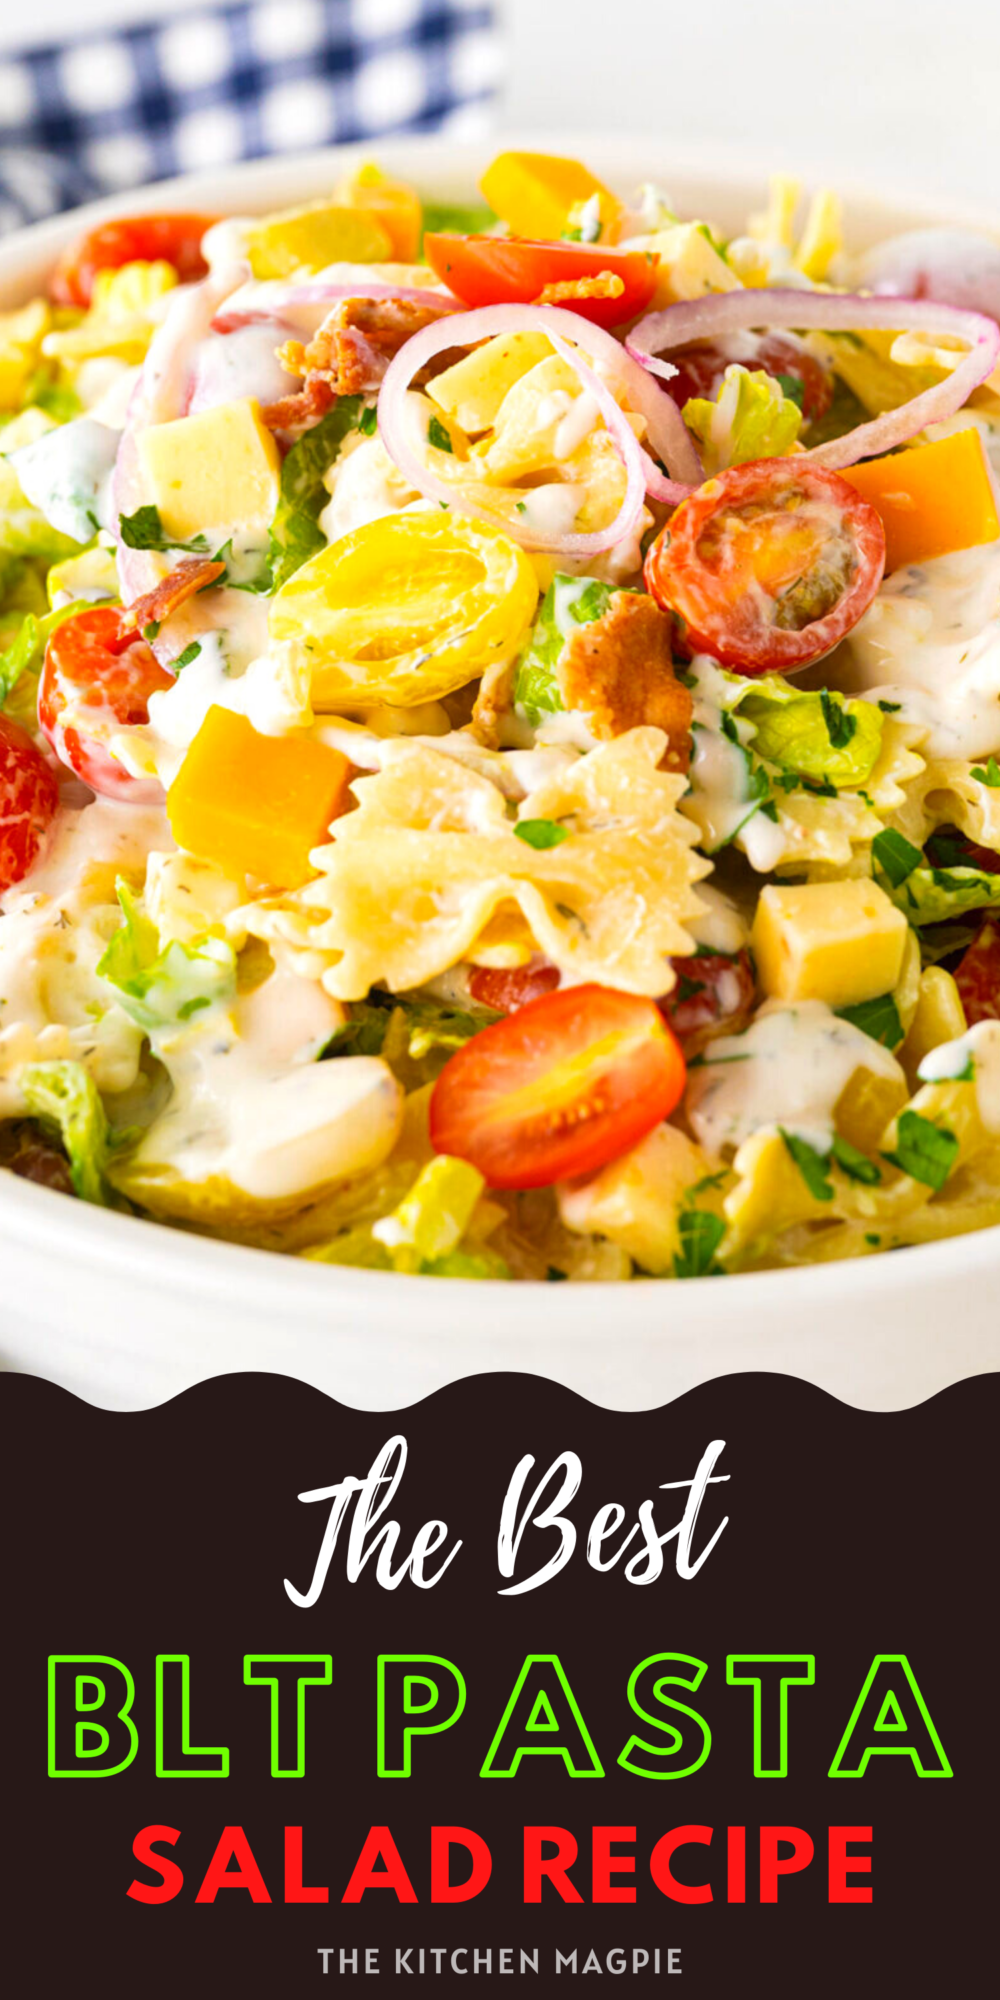 Fantastic BLT pasta salad with bacon, lettuce, tomatoes, two types of cheese and tangy Ranch dressing! The perfect side dish for BBQ's, or eat it as a meal!